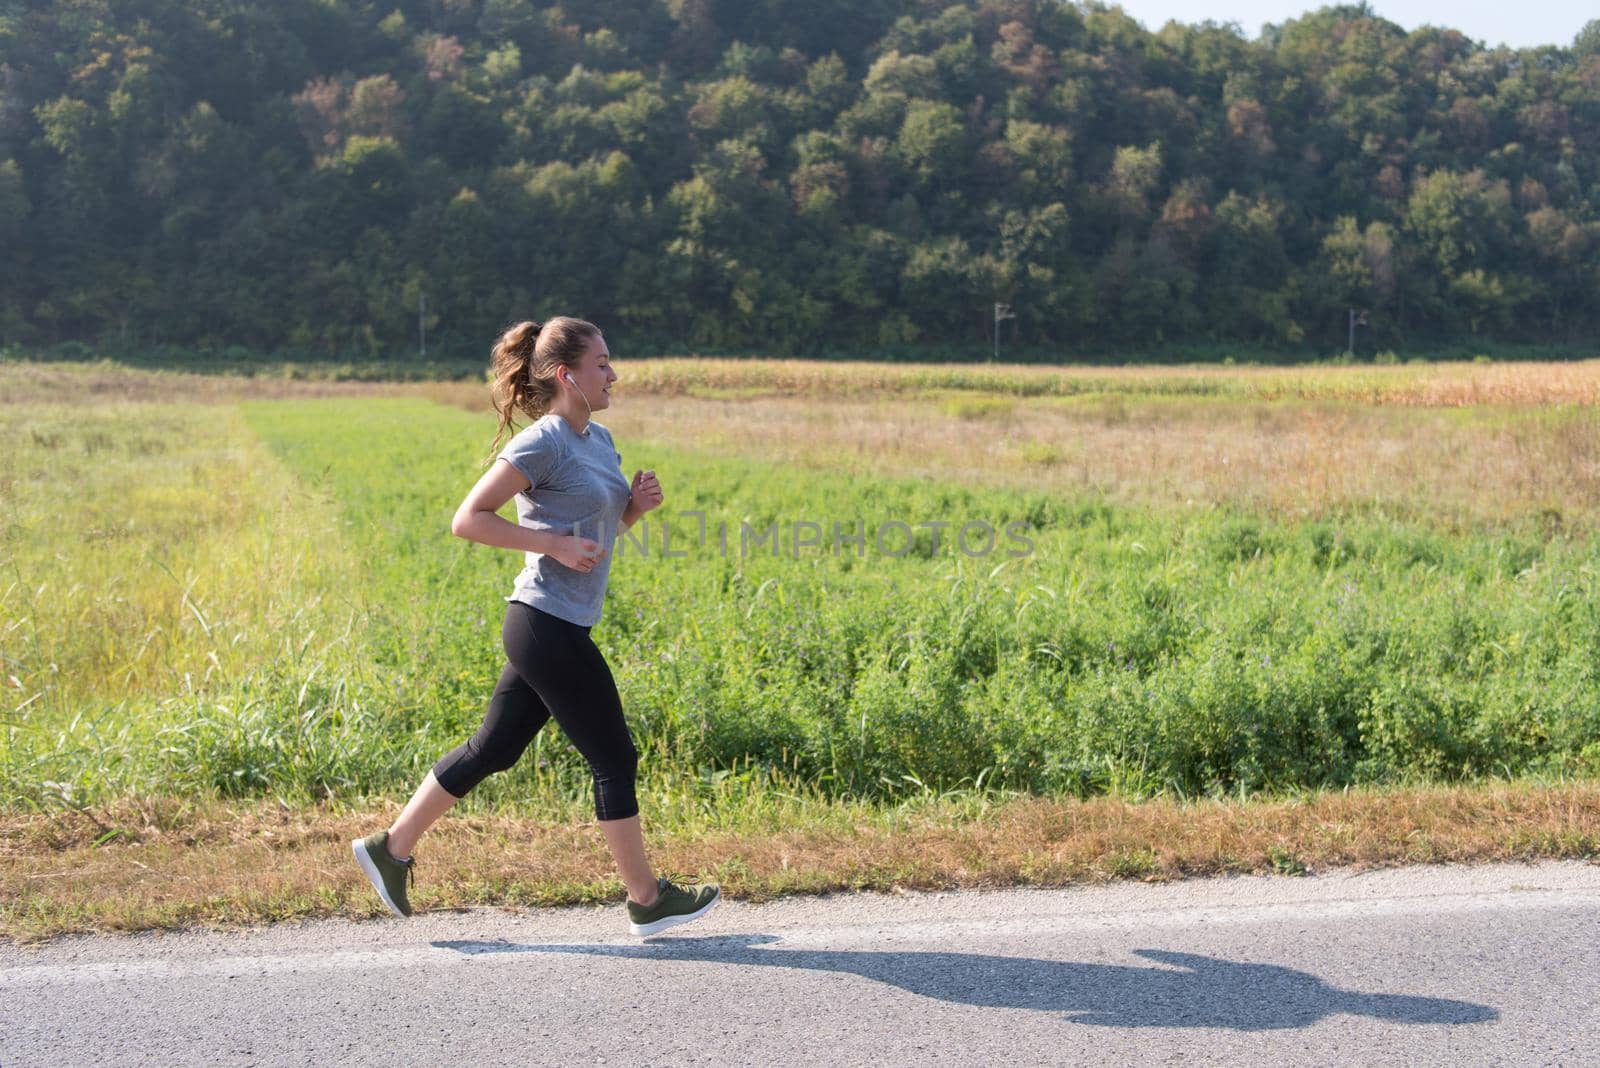 young woman enjoying in a healthy lifestyle while jogging along a country road, exercise and fitness concept